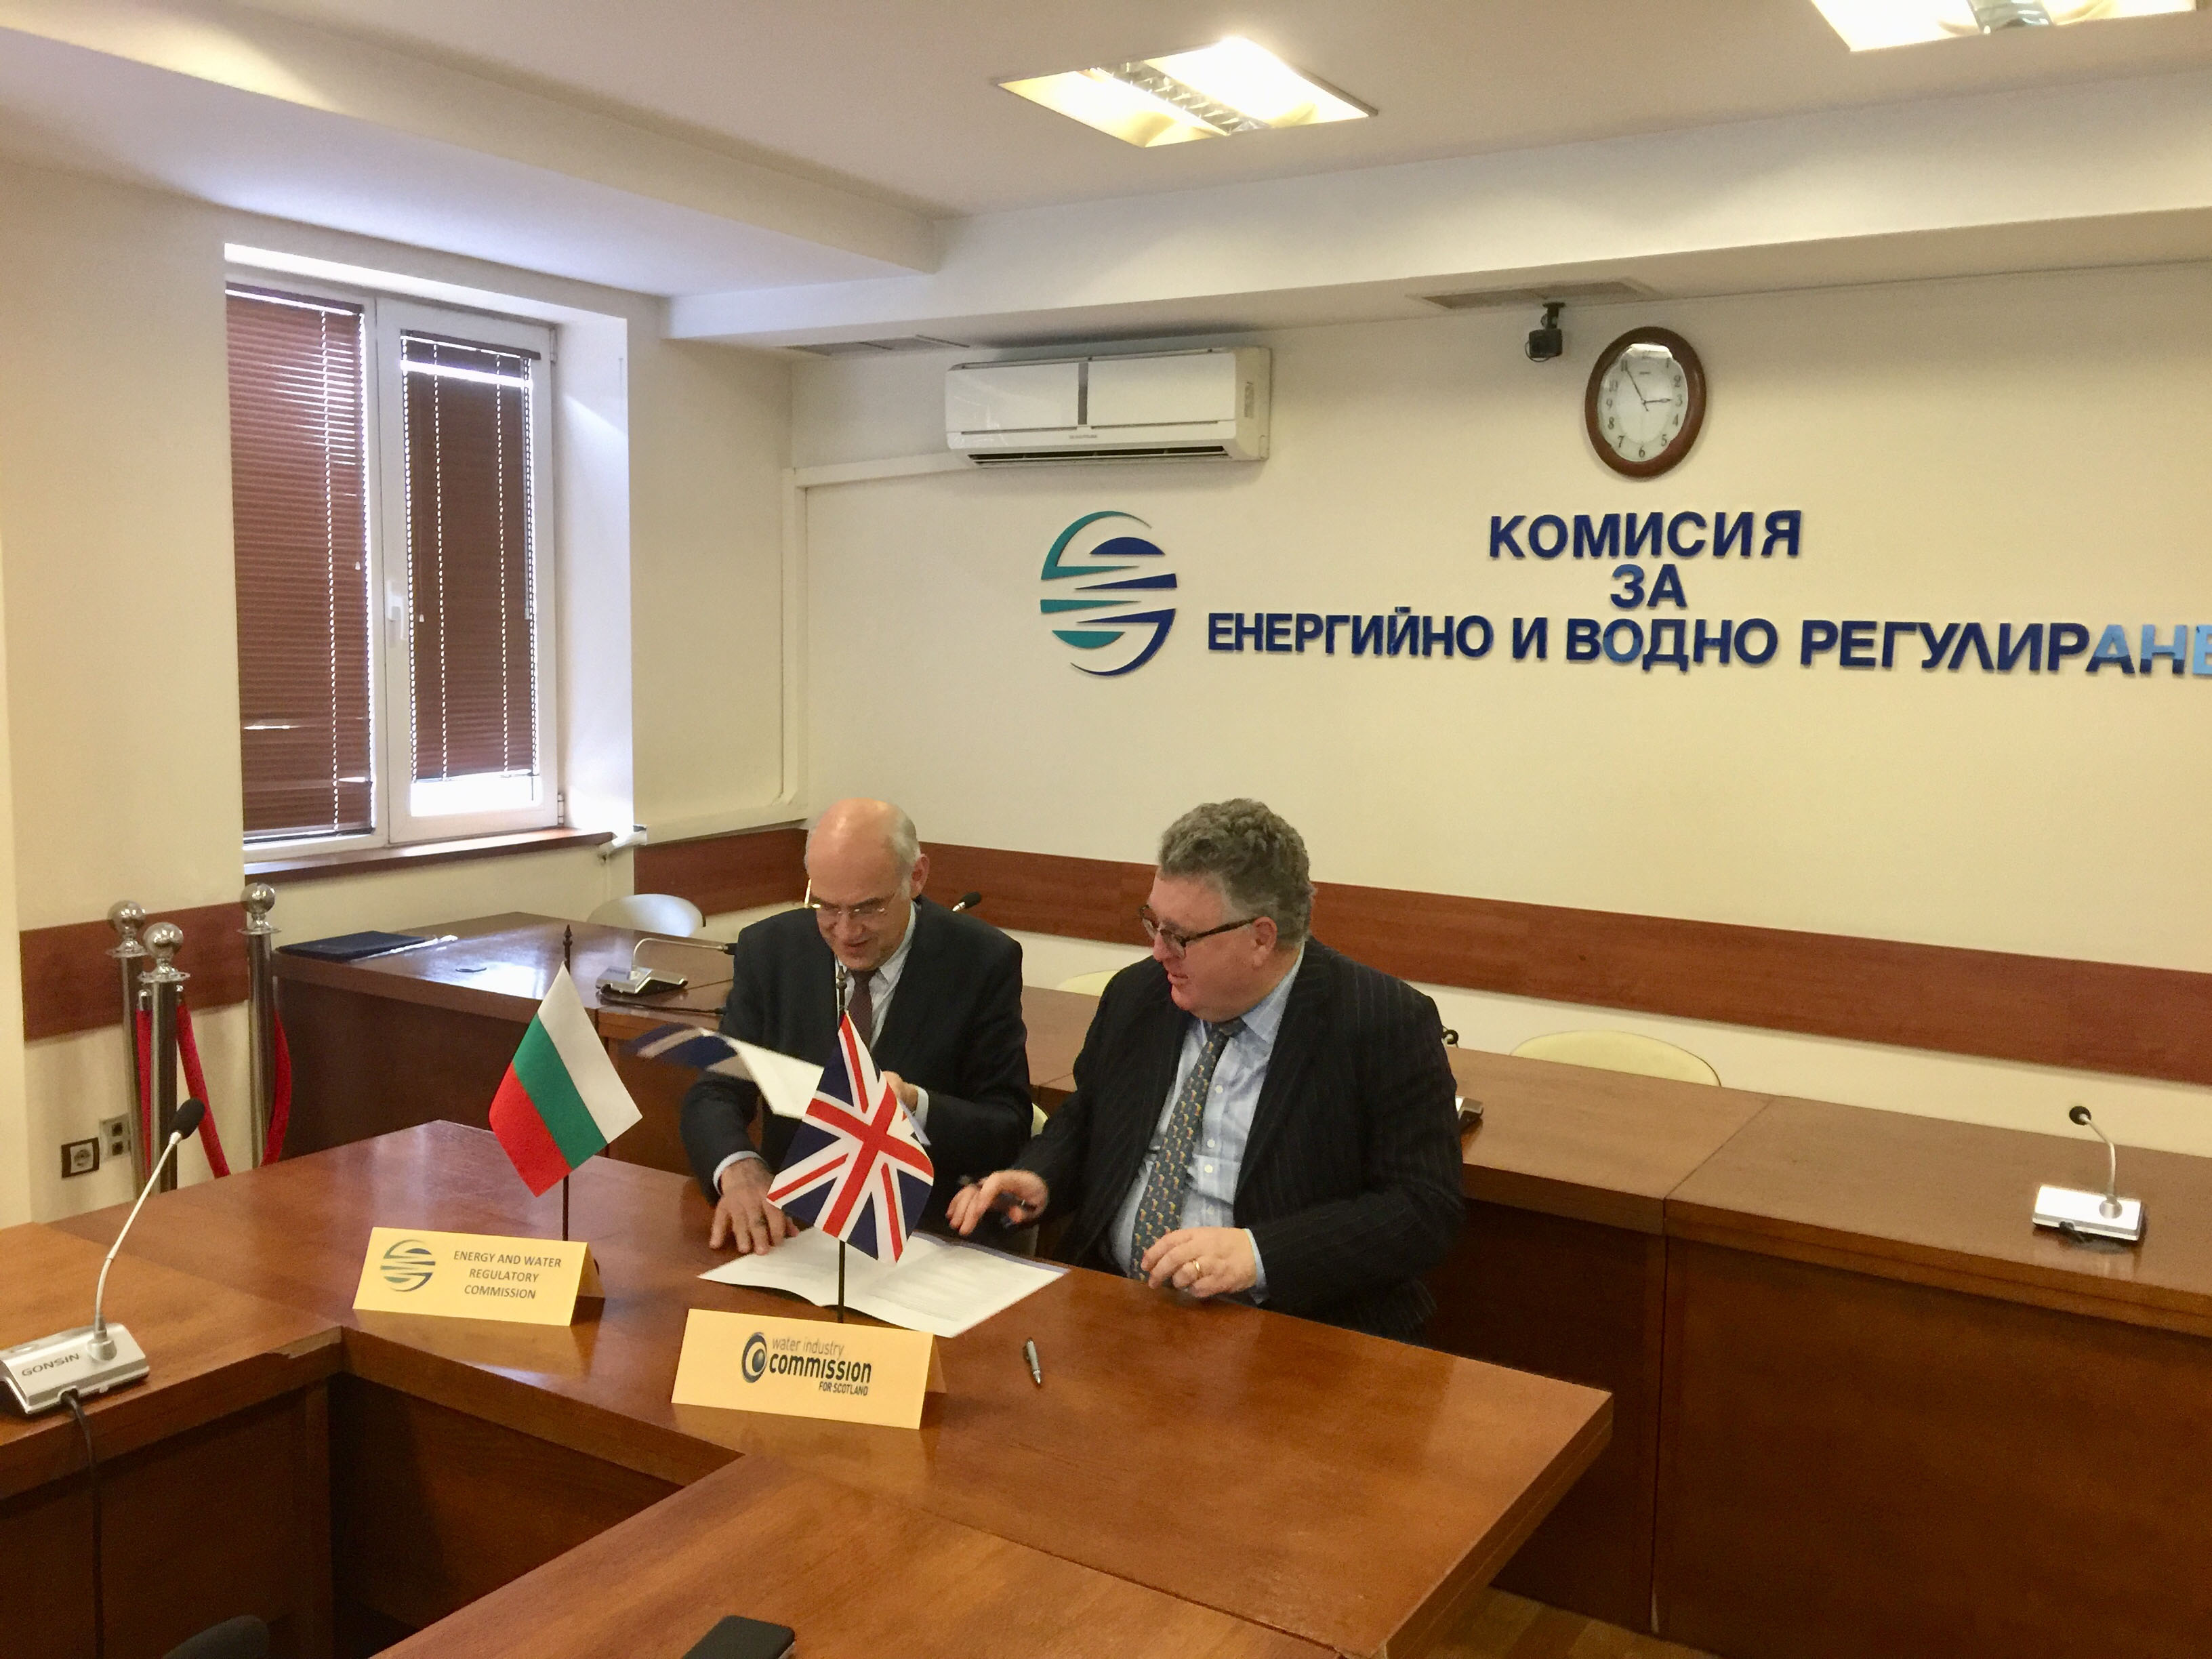 EWRC AND THE WATER INDUSTRY COMMISSION IN SCOTLAND SIGNED A COOPERATION AGREEMENT